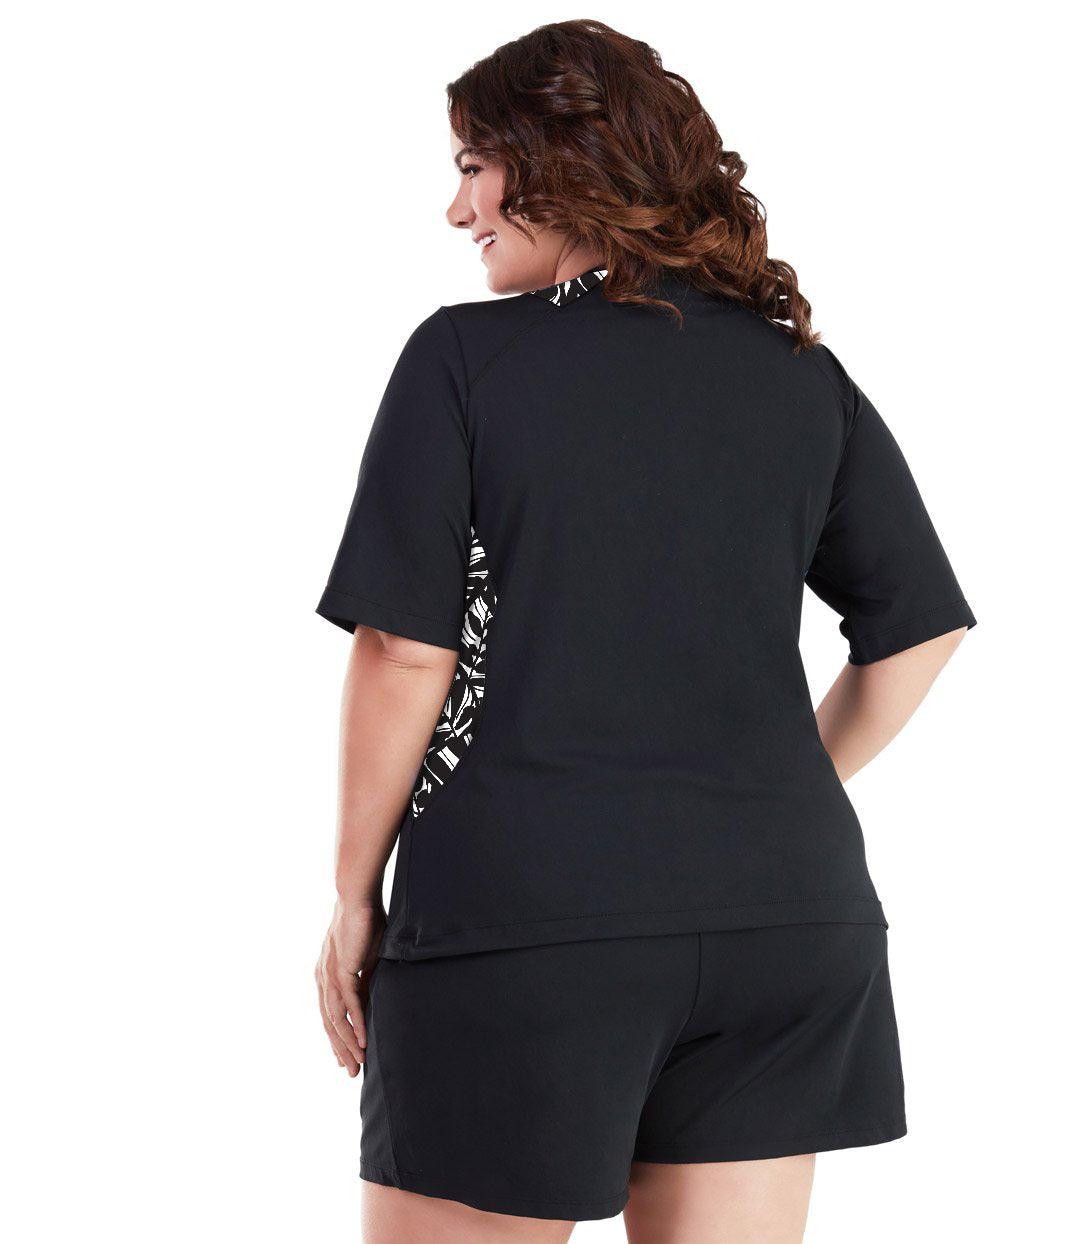 Plus size woman, back view, wearing AquaSport Colorblock Swim Tee Tropical Black. Tropcial black and white colorblocking on waist and shoulders. Long cover short sleeves meeting at the elbow. 